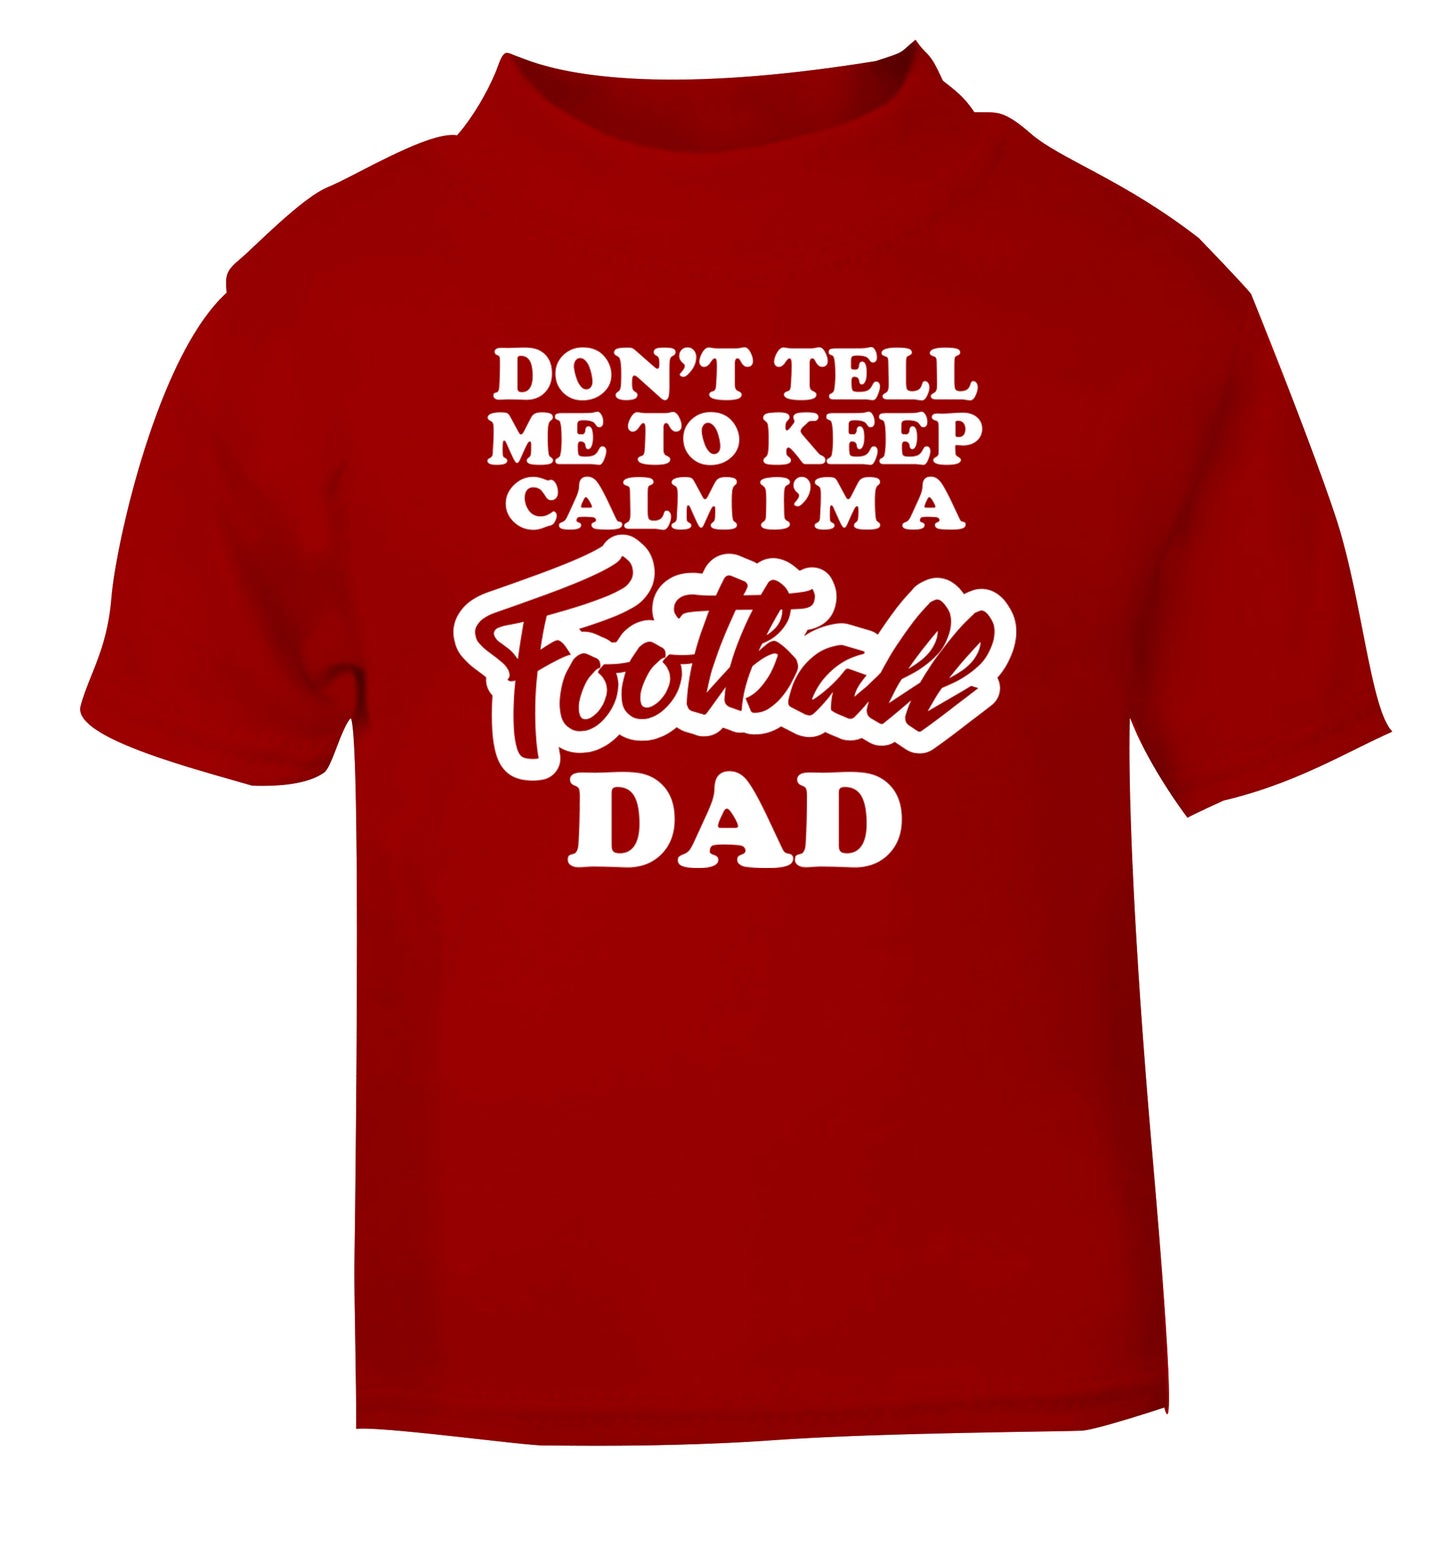 Don't tell me to keep calm I'm a football grandad red Baby Toddler Tshirt 2 Years